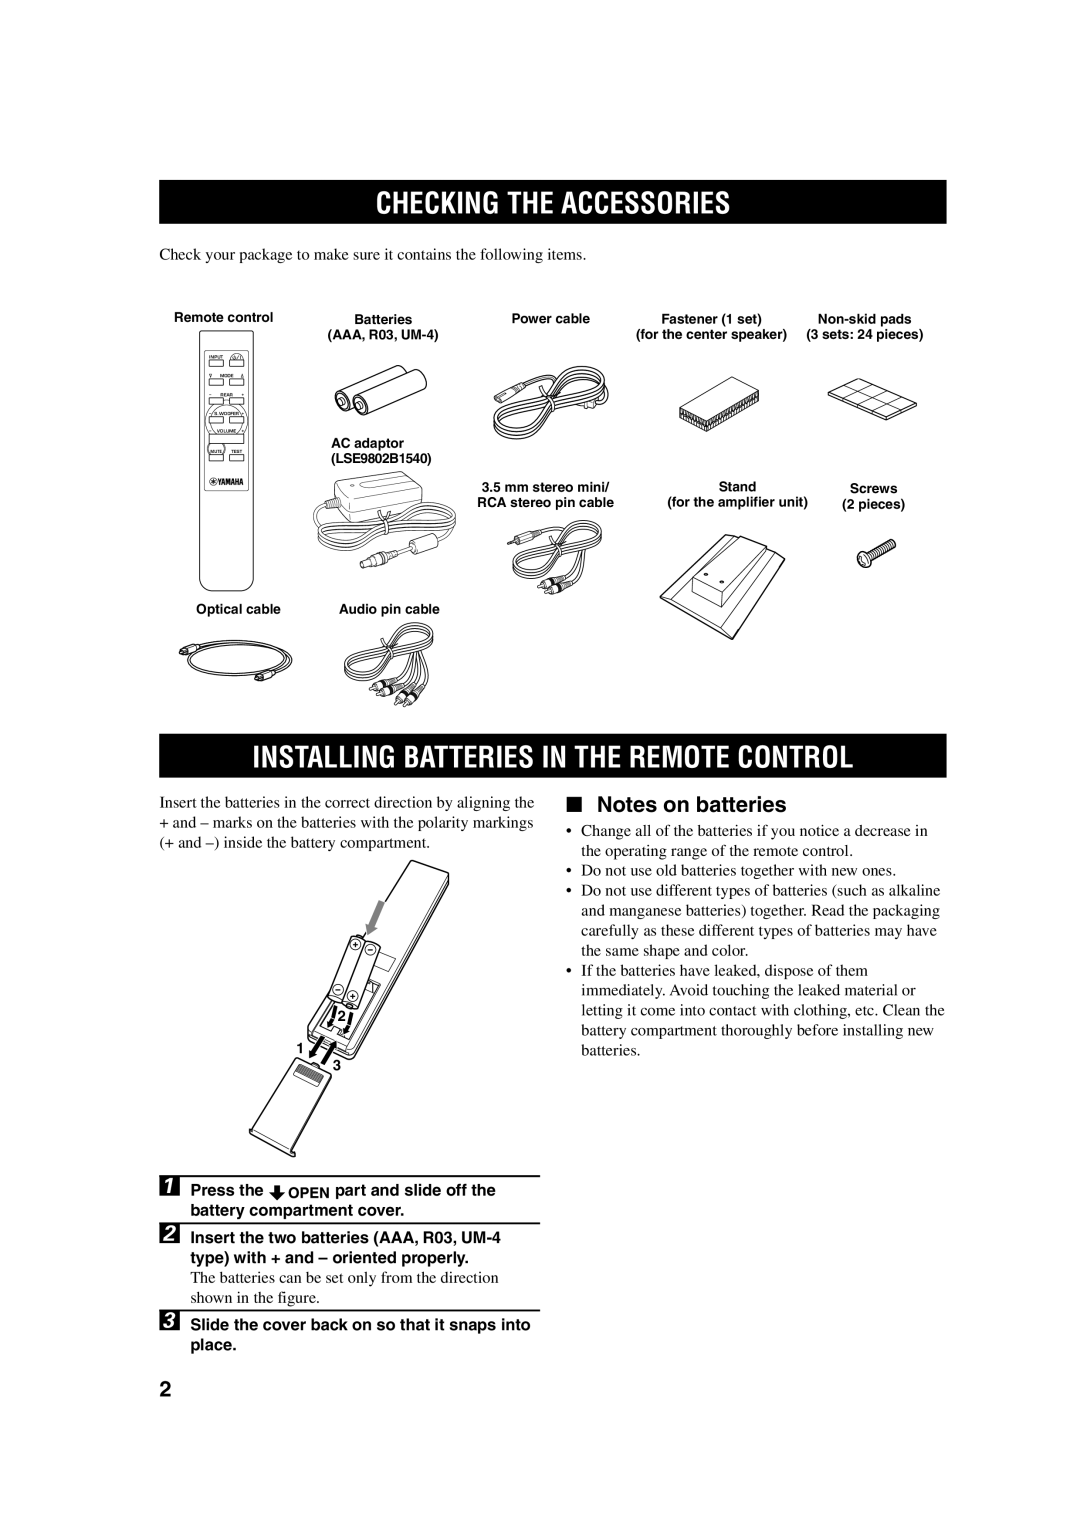 Yamaha TSS-10 owner manual Checking The Accessories, Installing Batteries In The Remote Control, Notes on batteries 